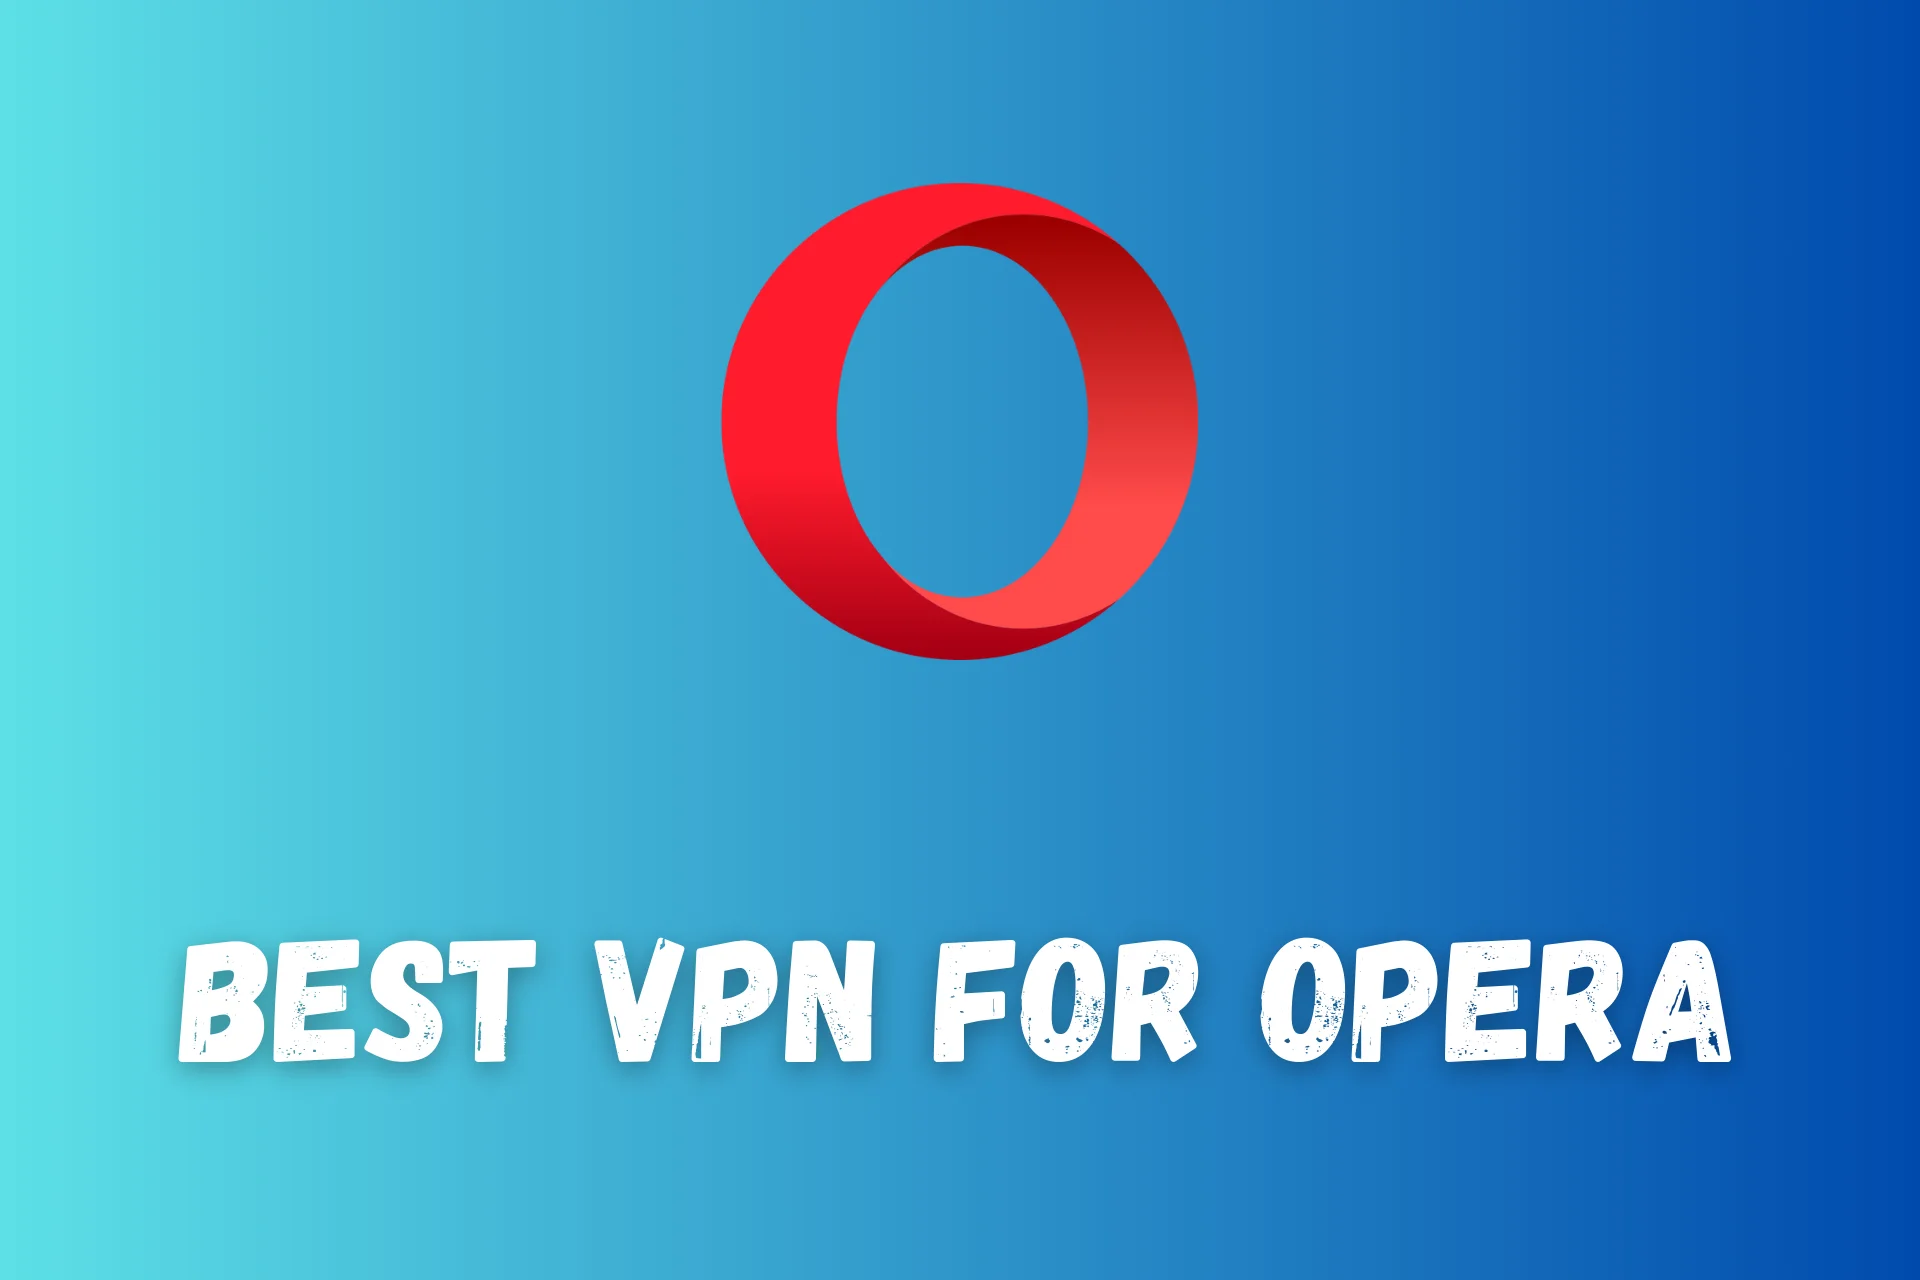 Best VPN for Opera [Top 7 Expert-Tested Services]